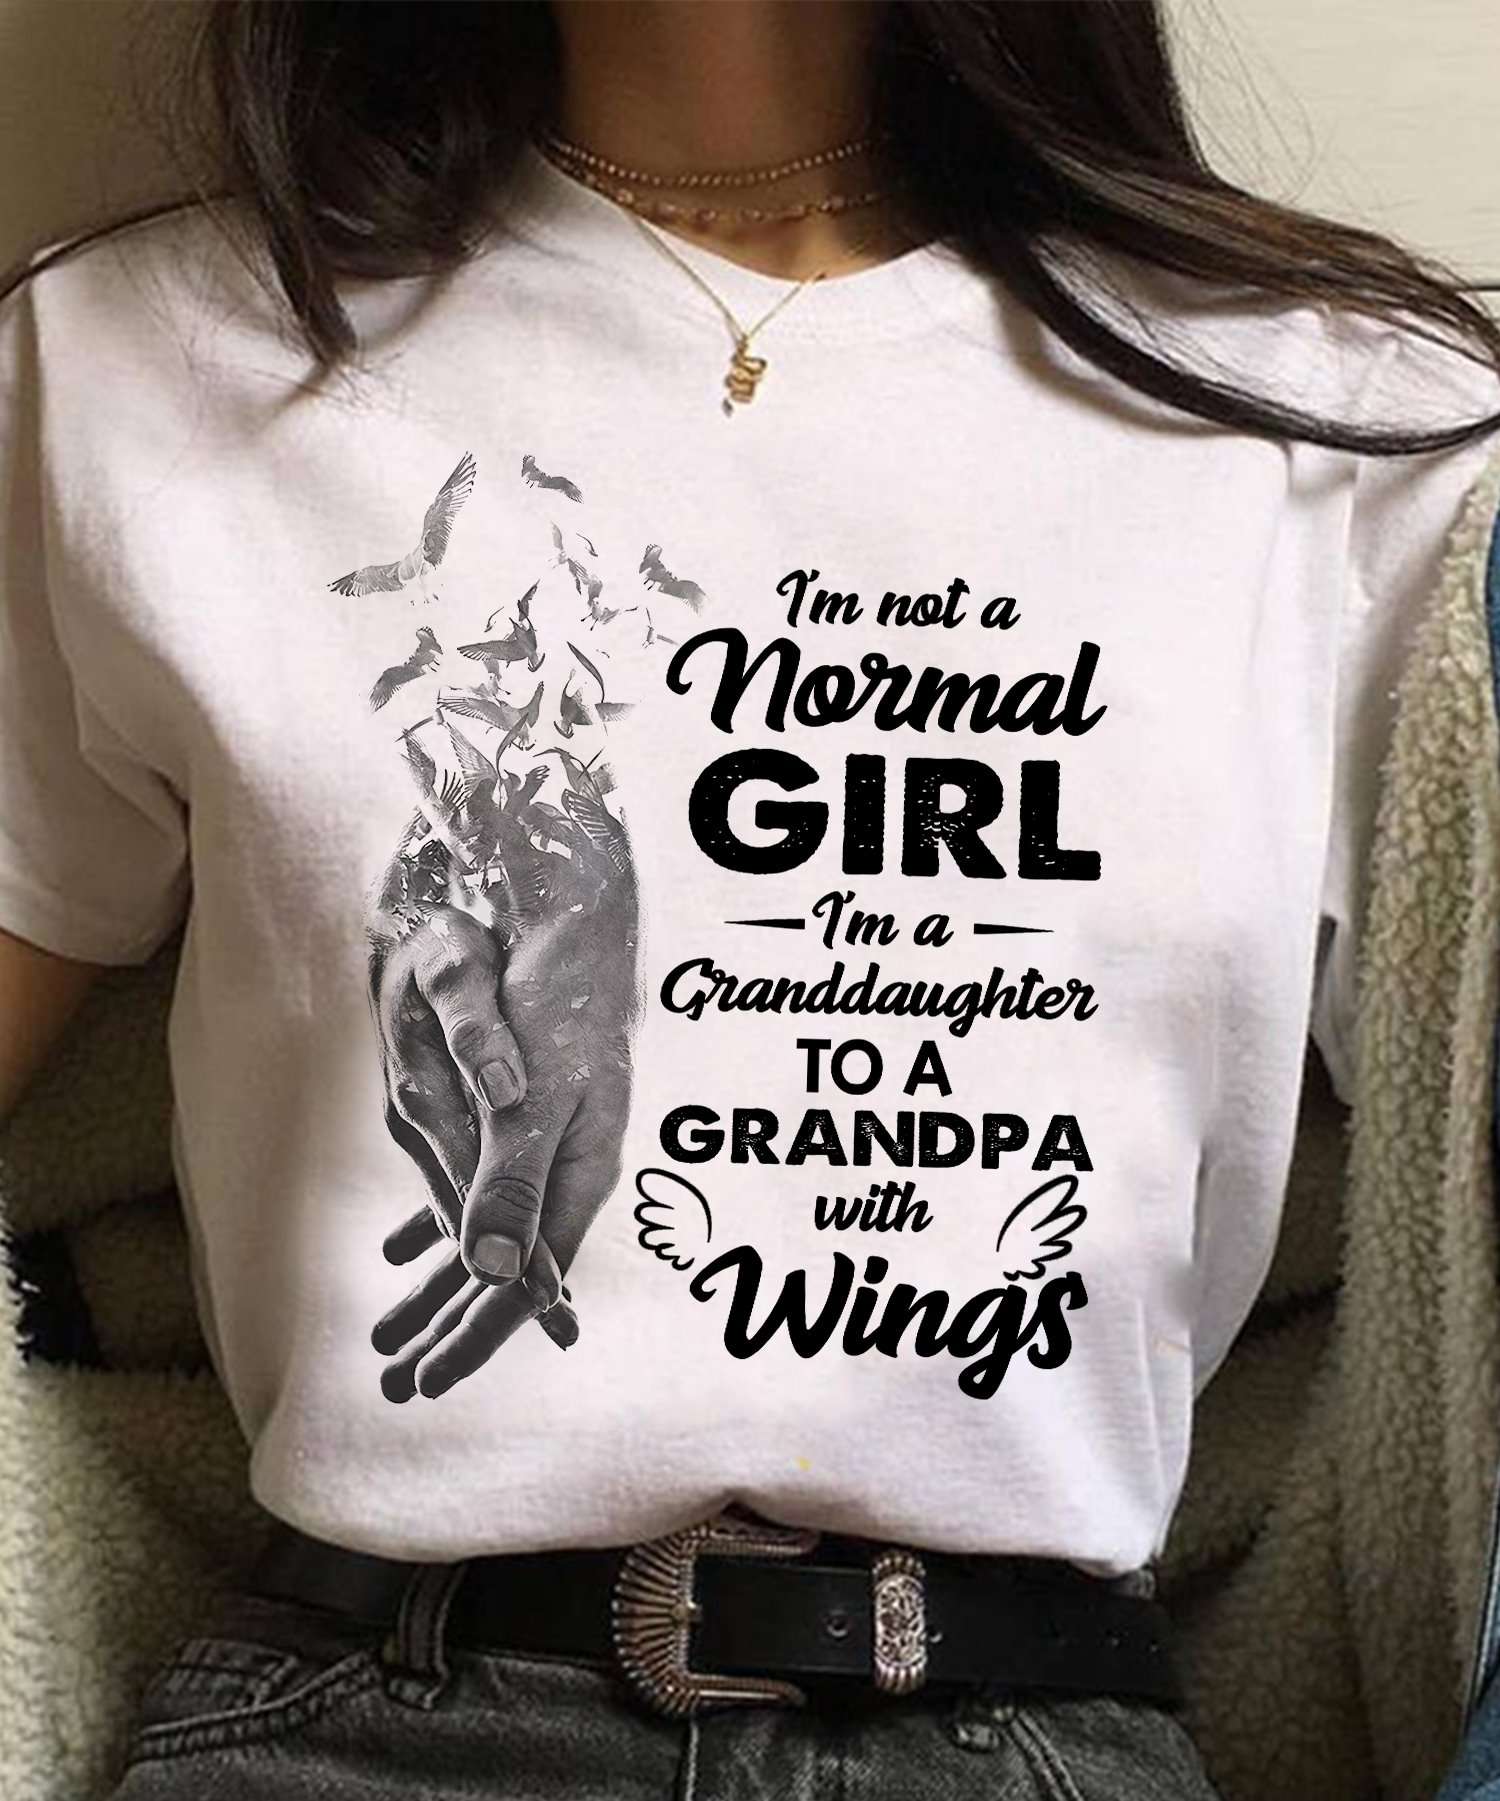 I'm not a normal girl I'm a granddaughter to a grandpa with wings - Grandpa and granddaughter